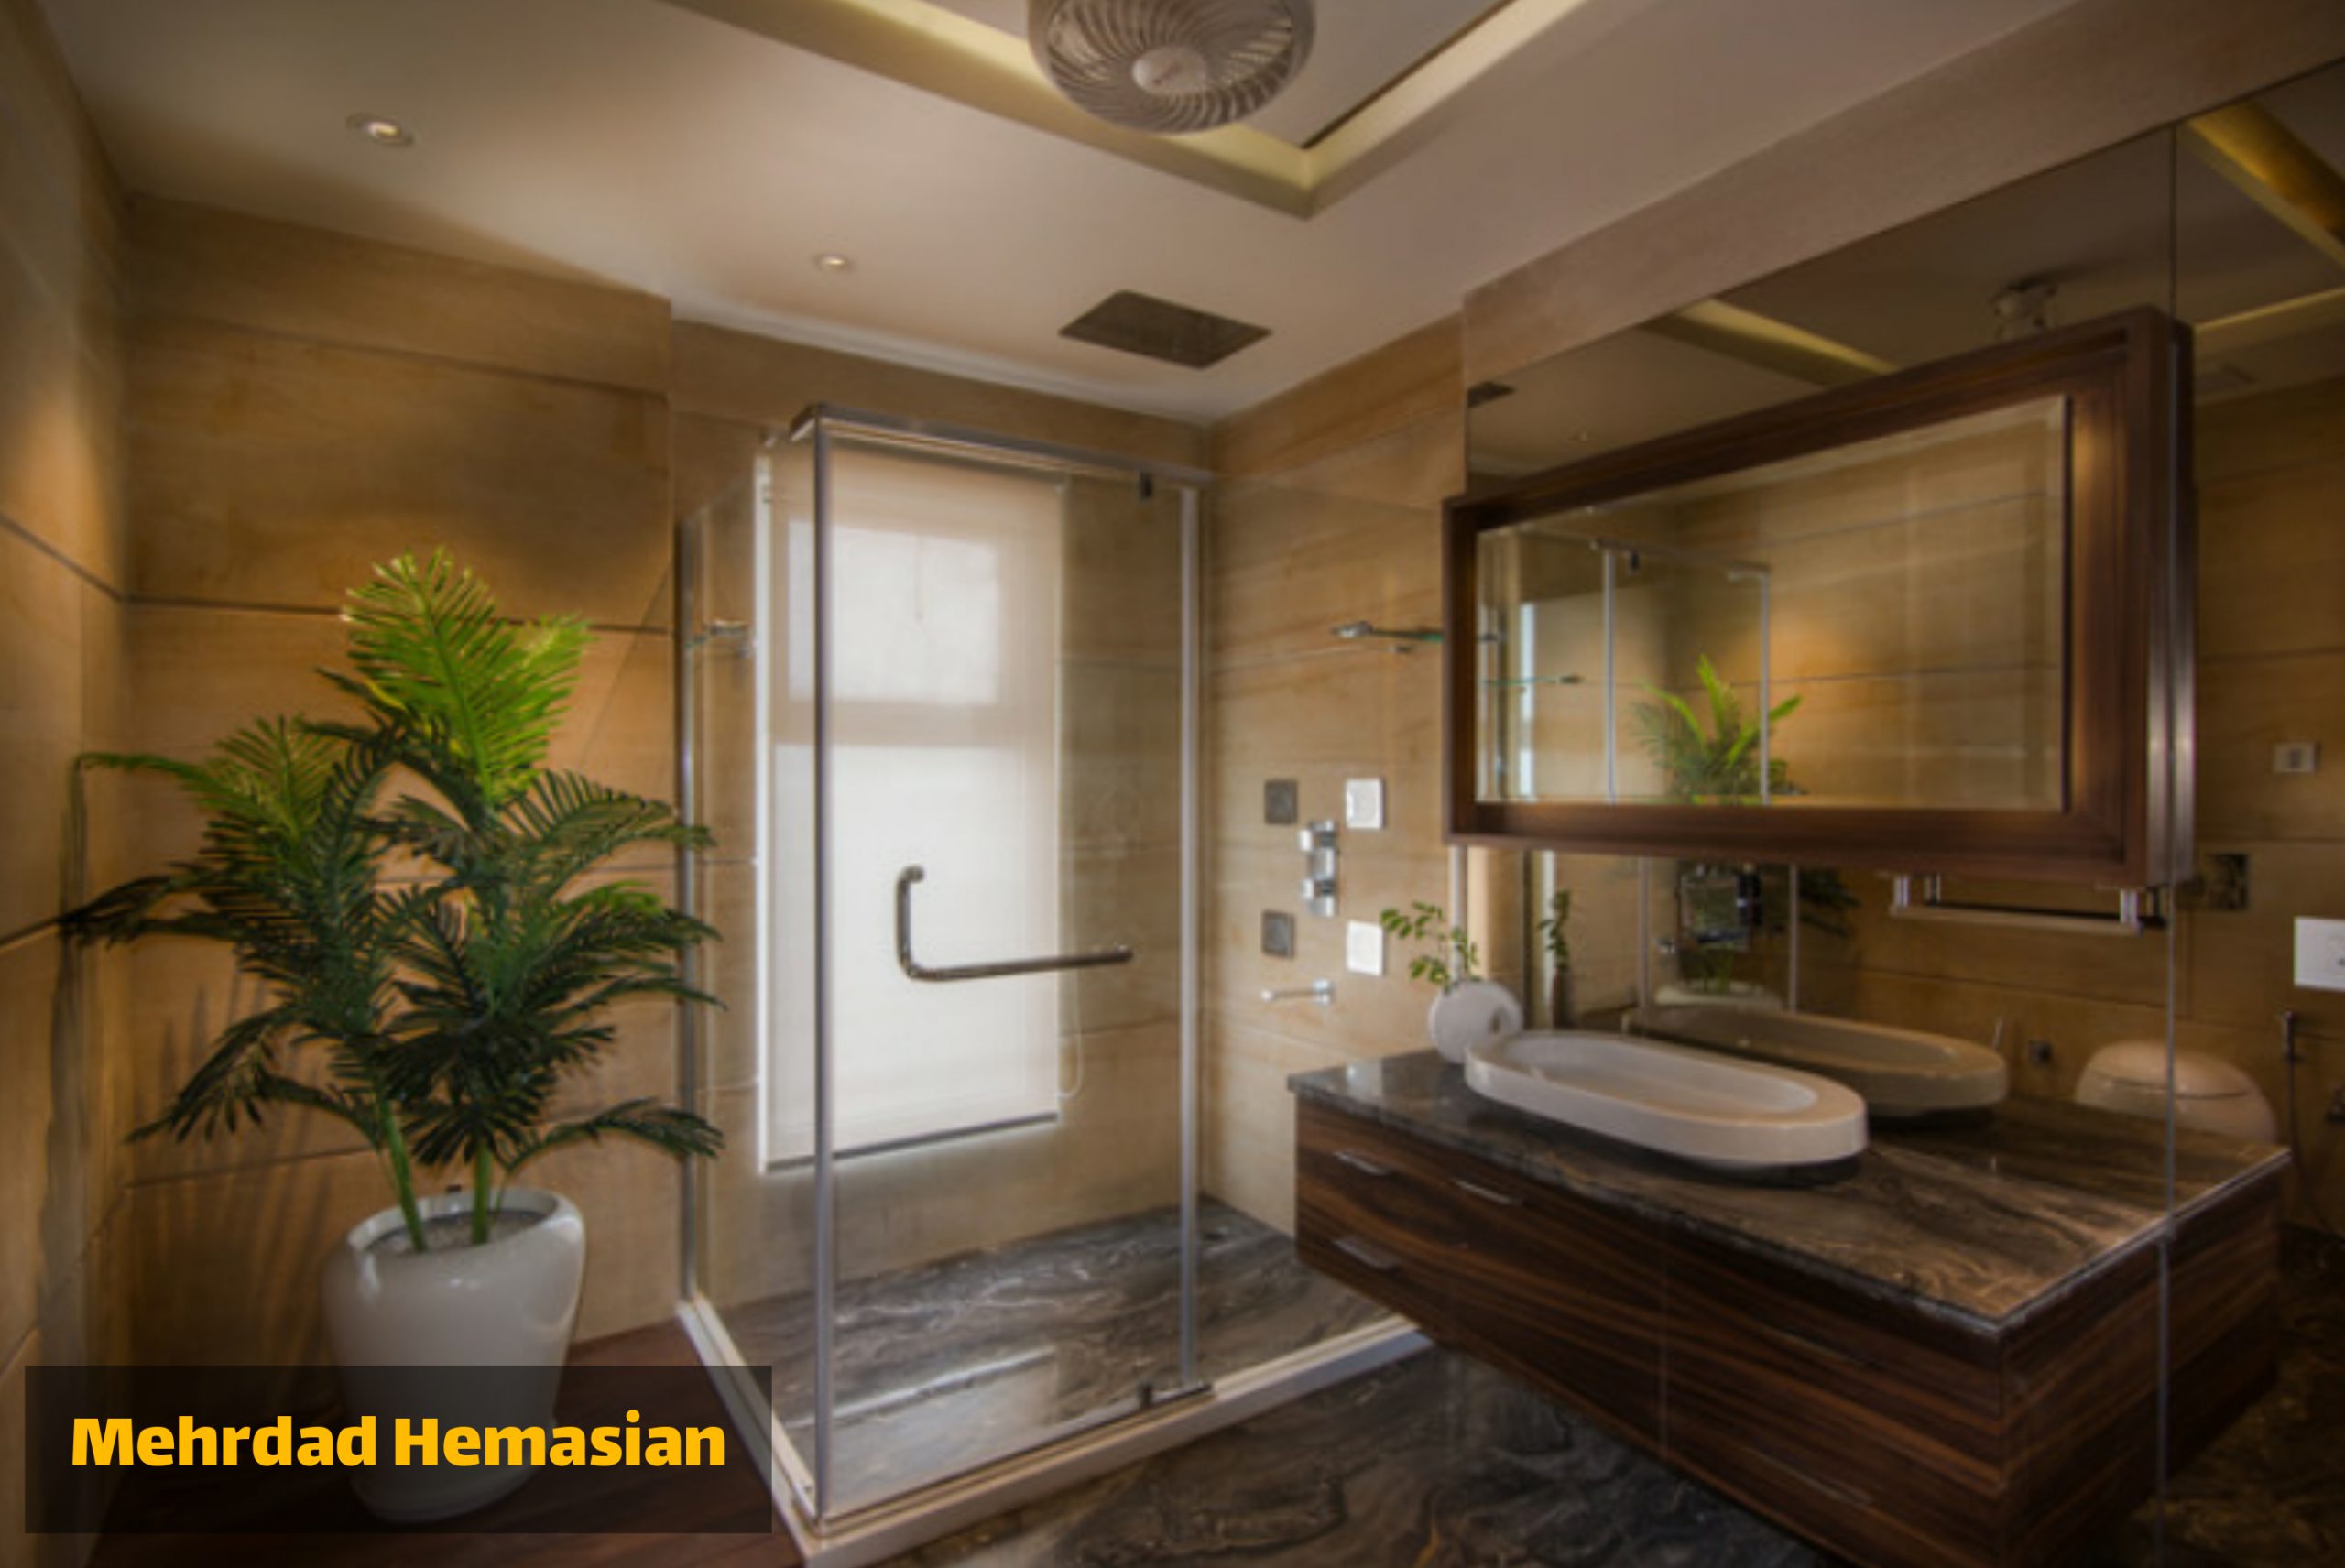 The importance of modern style for the bathroom